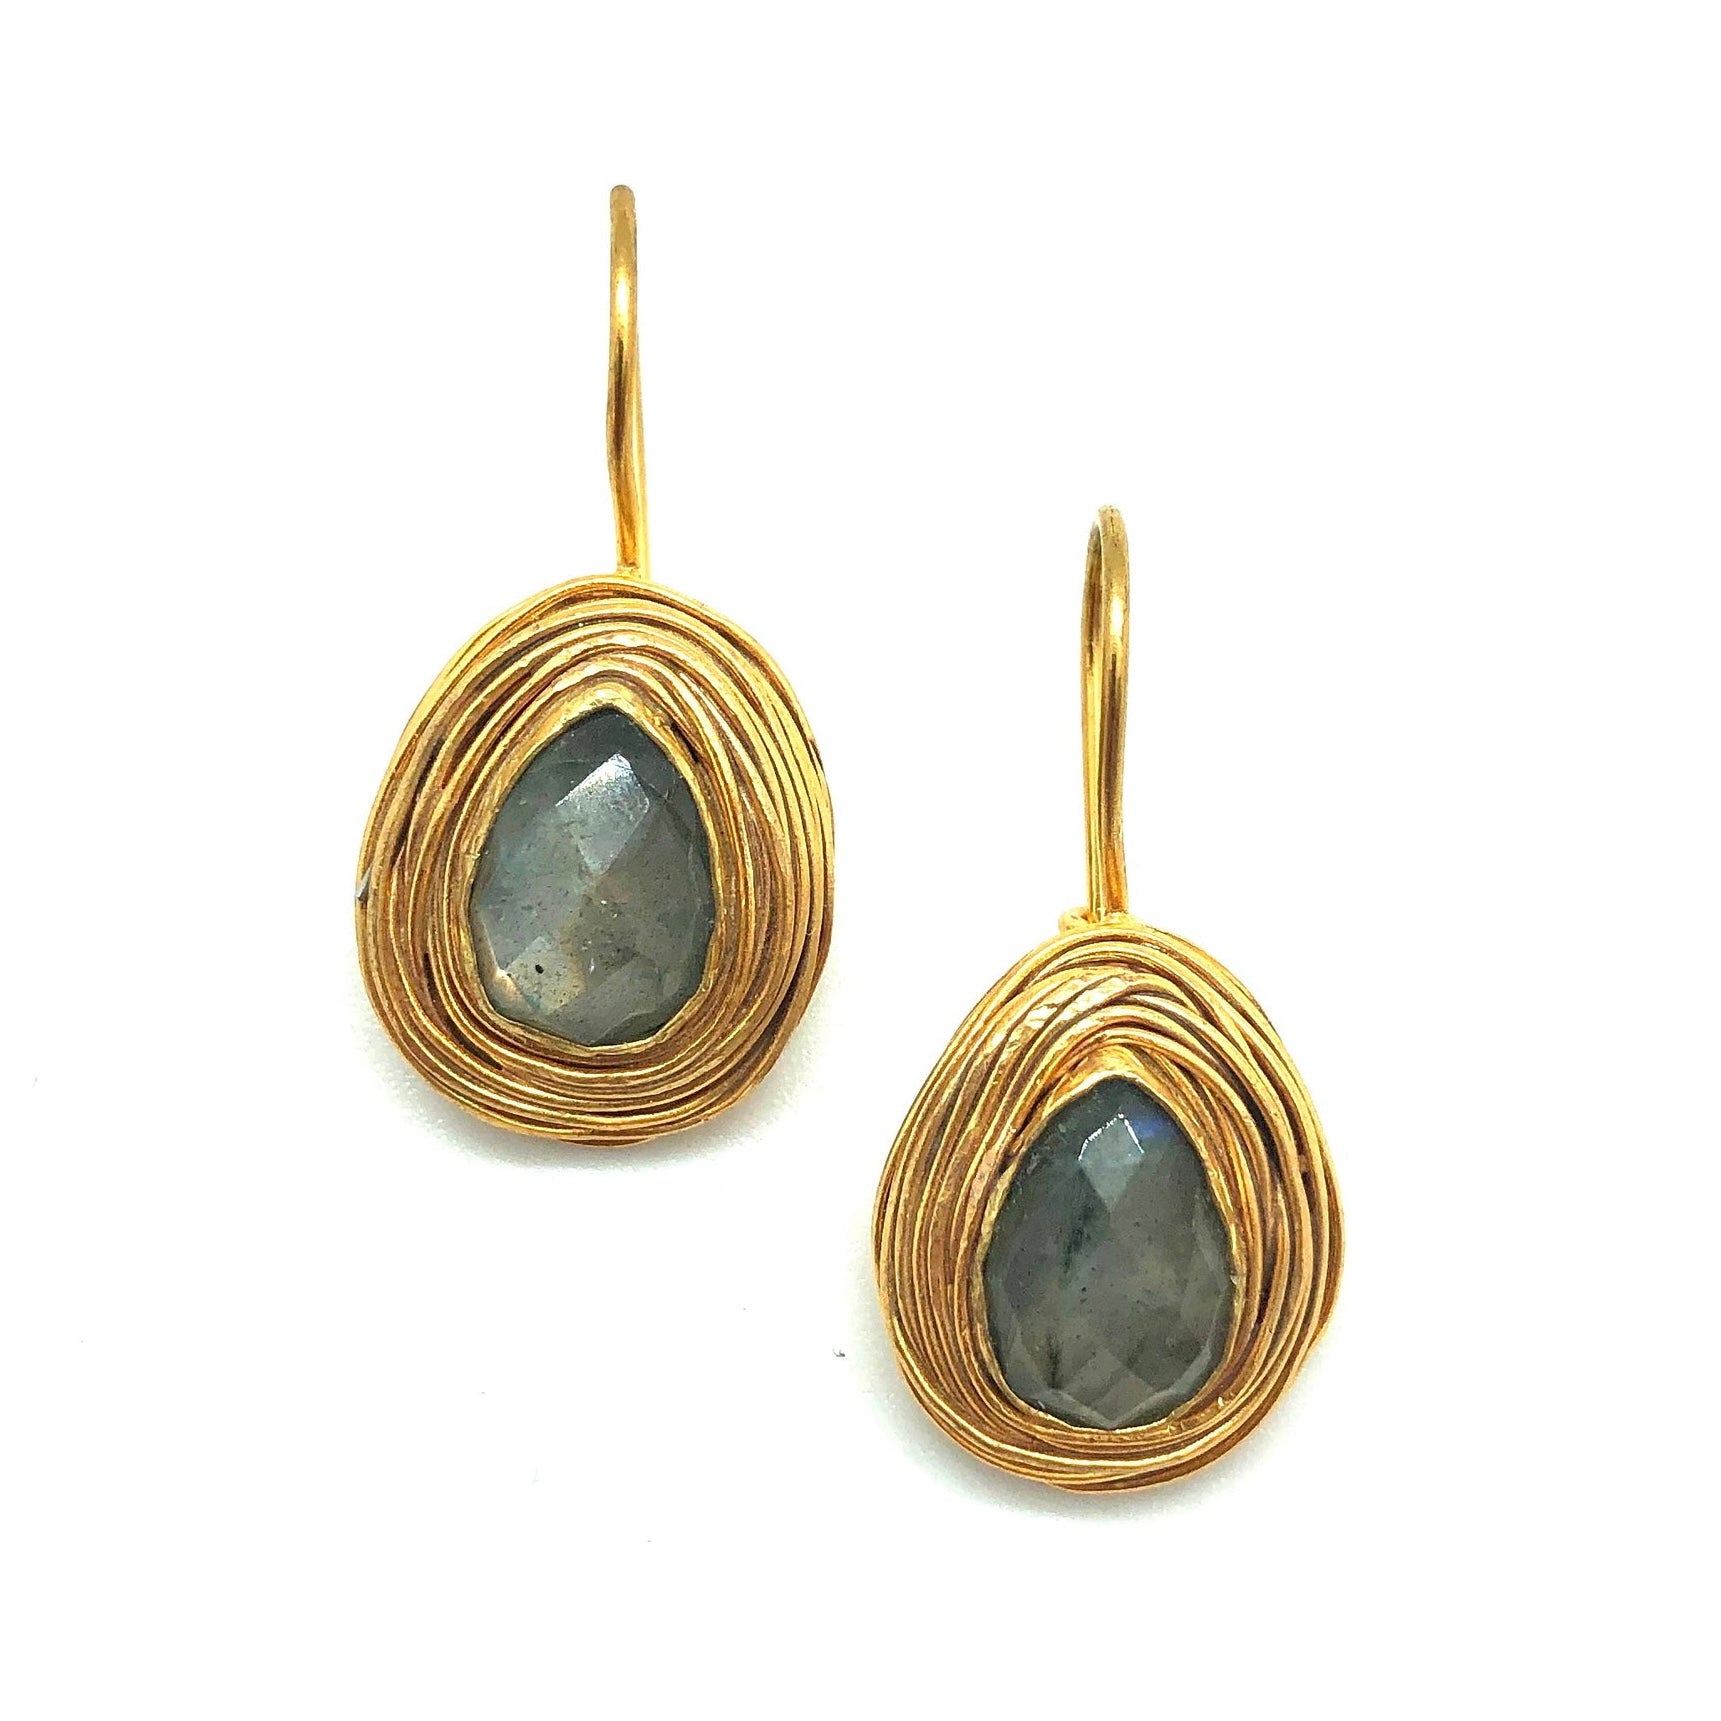 Gold Drop Earrings with Labradorite Gemstone for women at RM Kandy